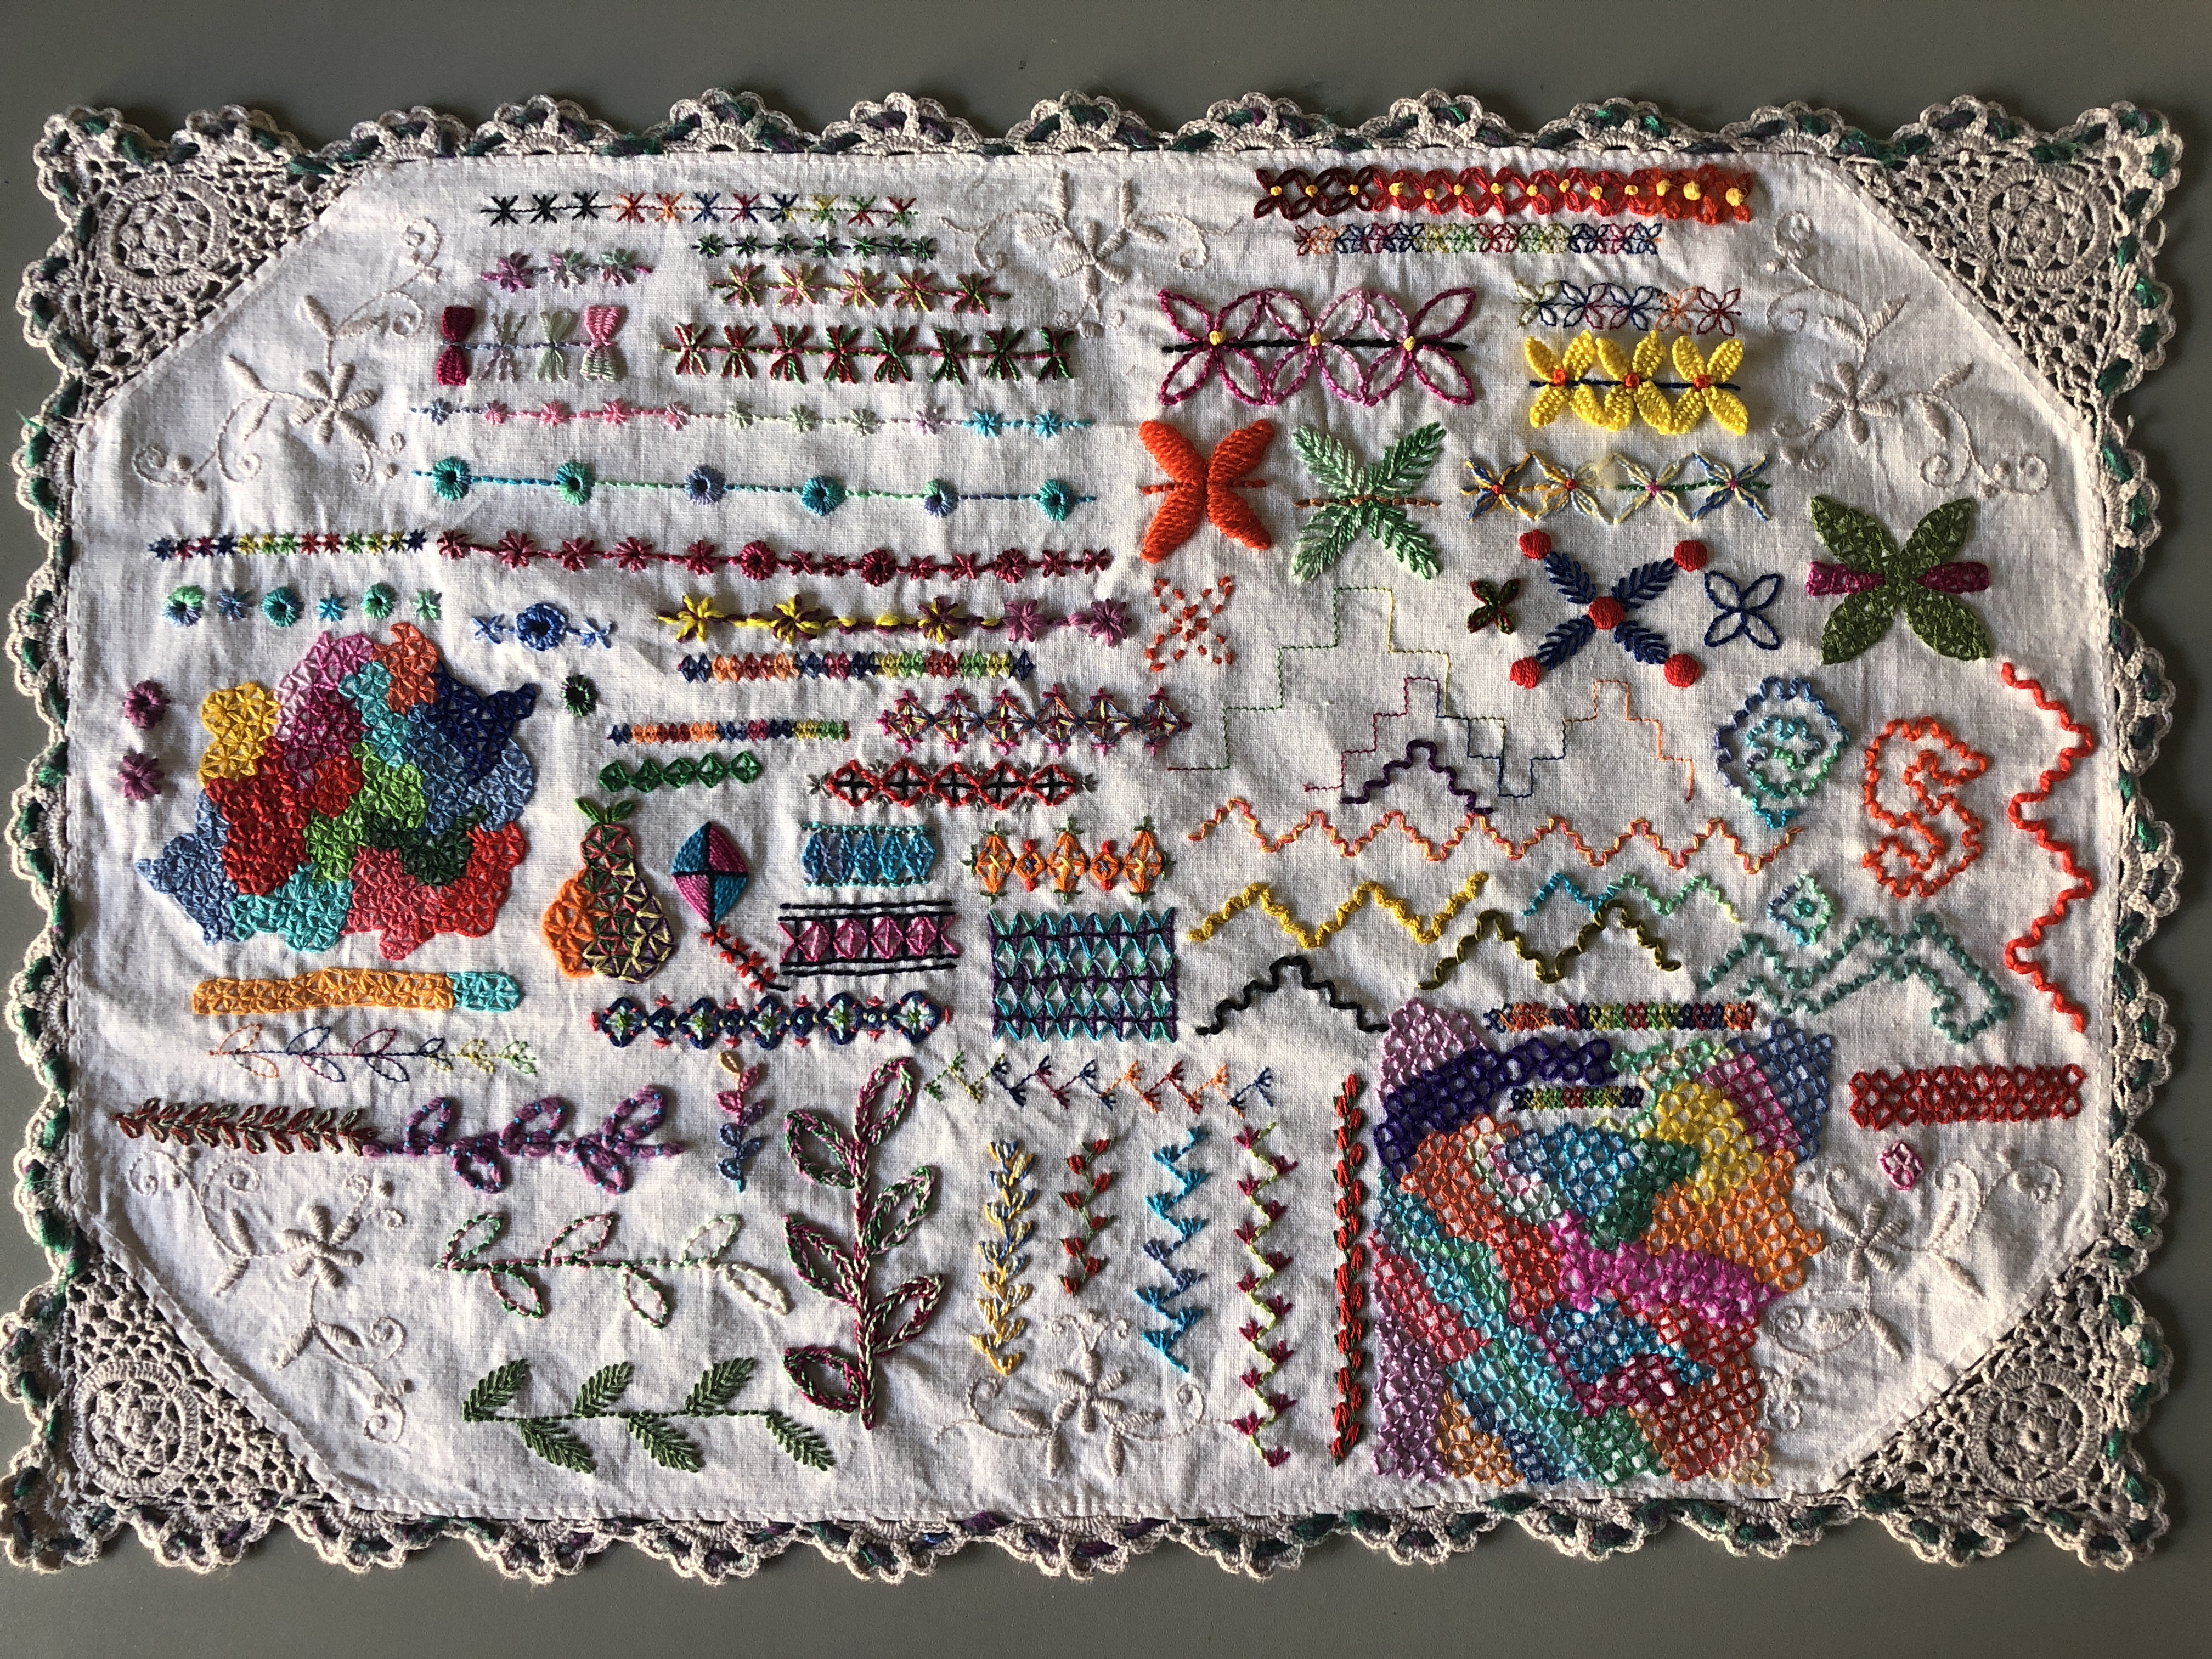 Hand Embroidery Sampler Patterns A Machine Stitch And Hand Embroidery Sampler Knitting And